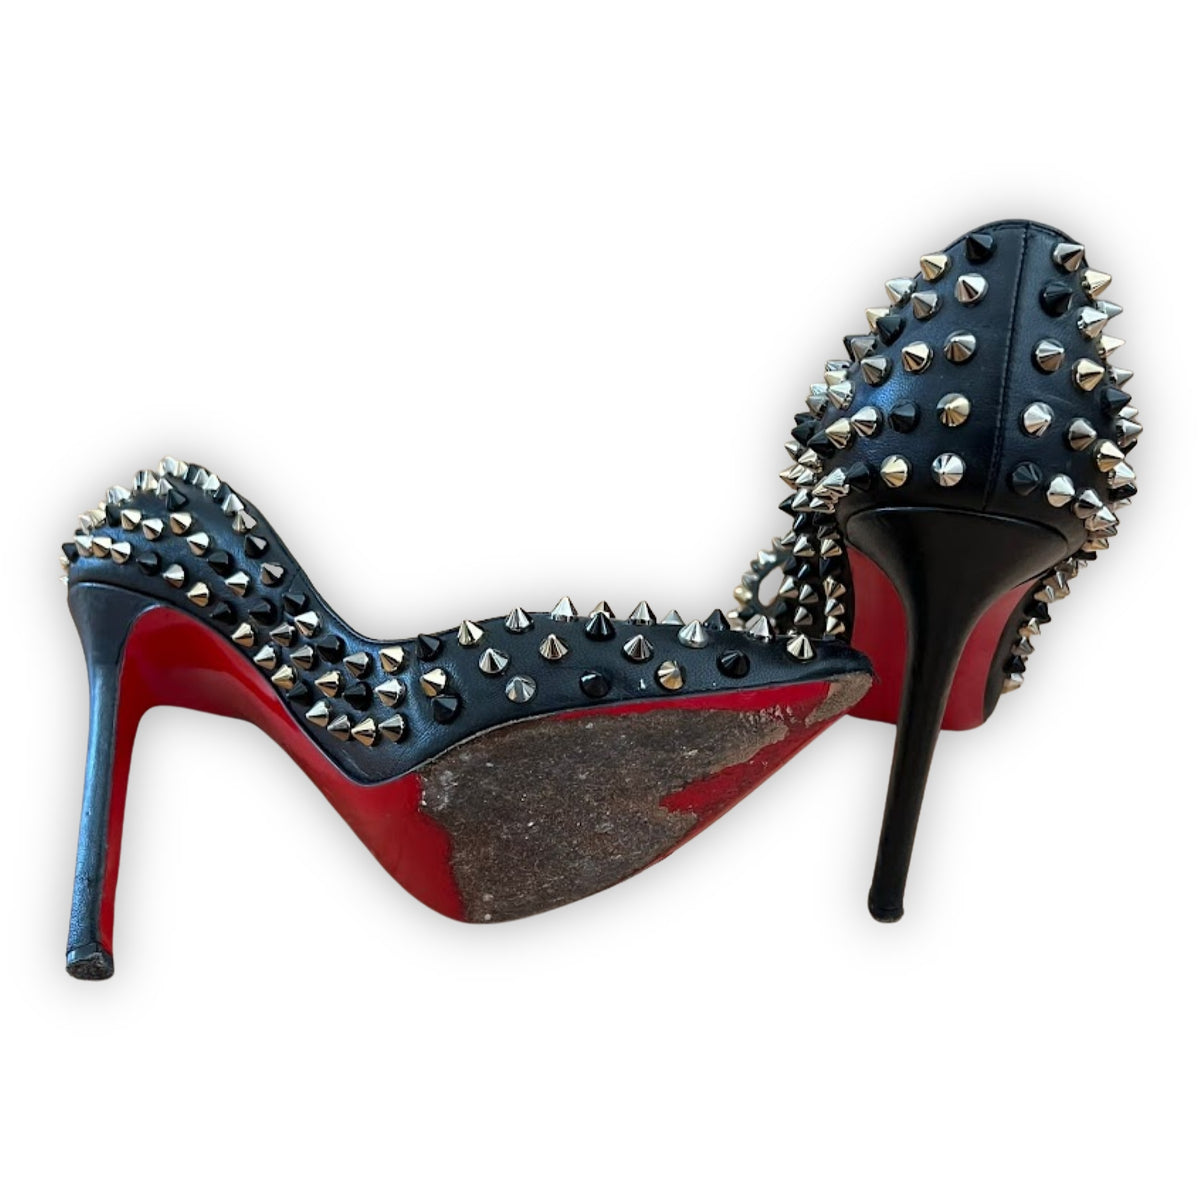 CHRISTIAN LOUBOUTIN Black Pigalle Studded Pumps | Size 36.5